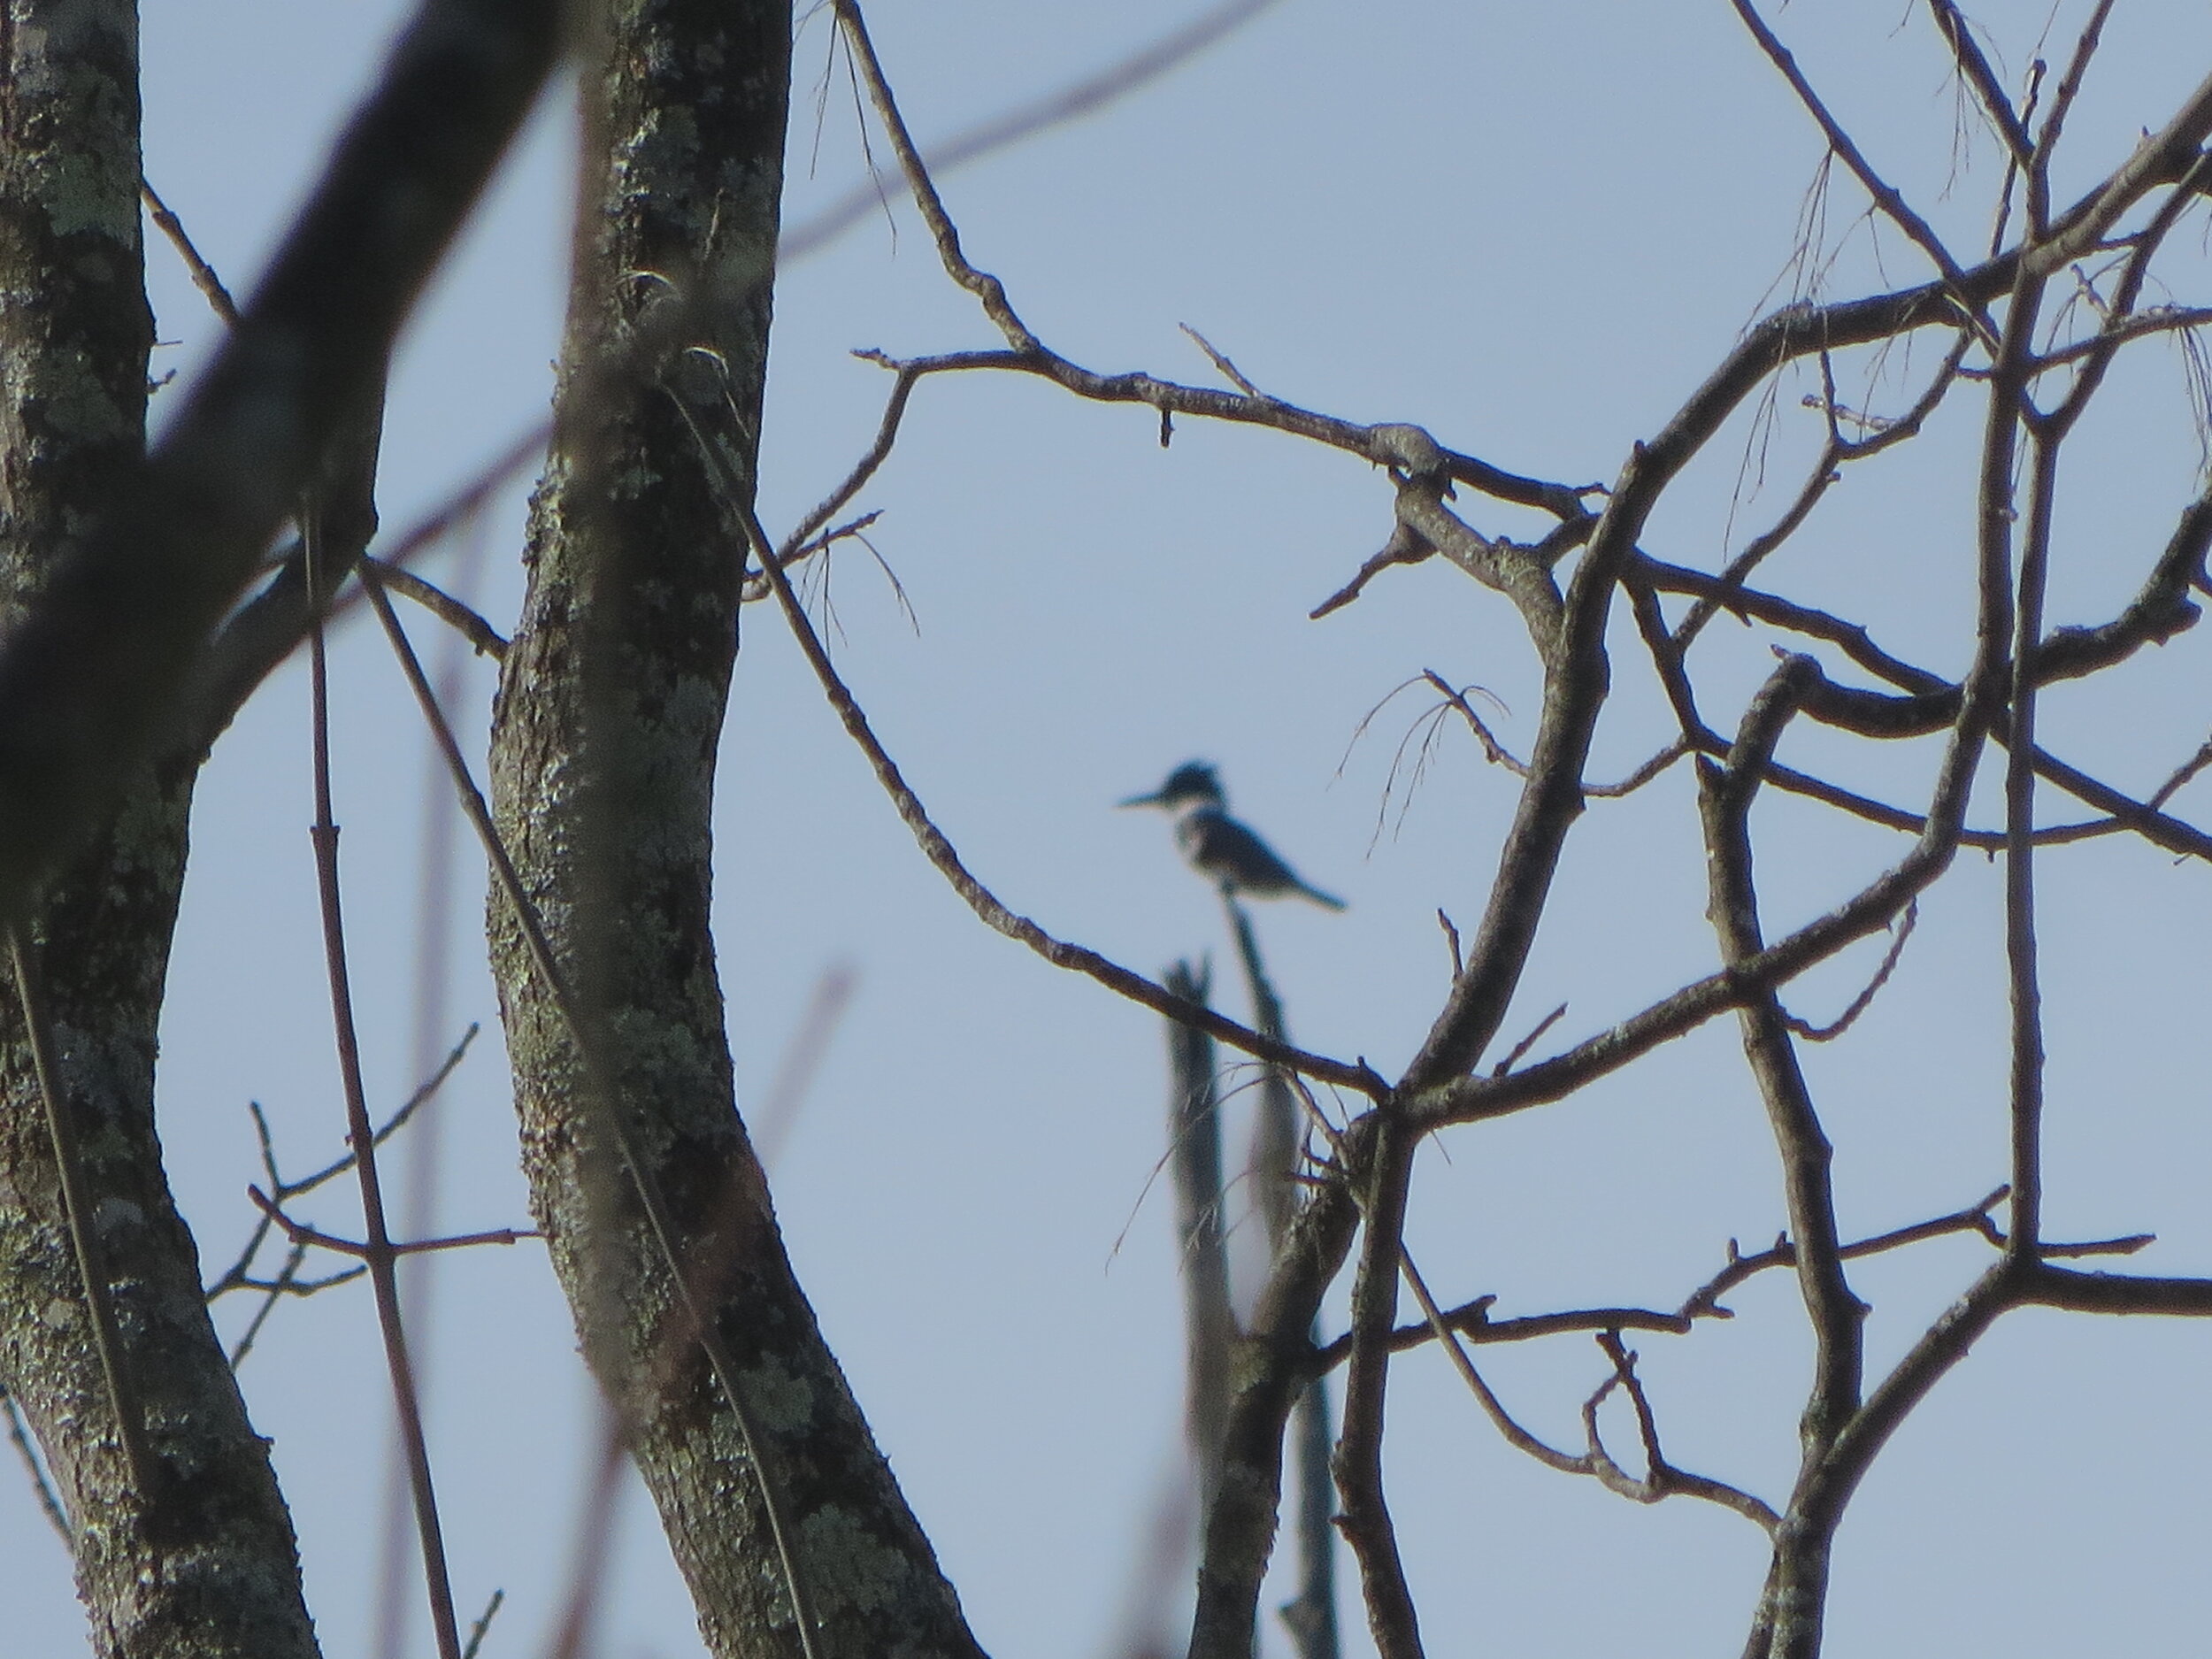 Blurry Belted Kingfisher